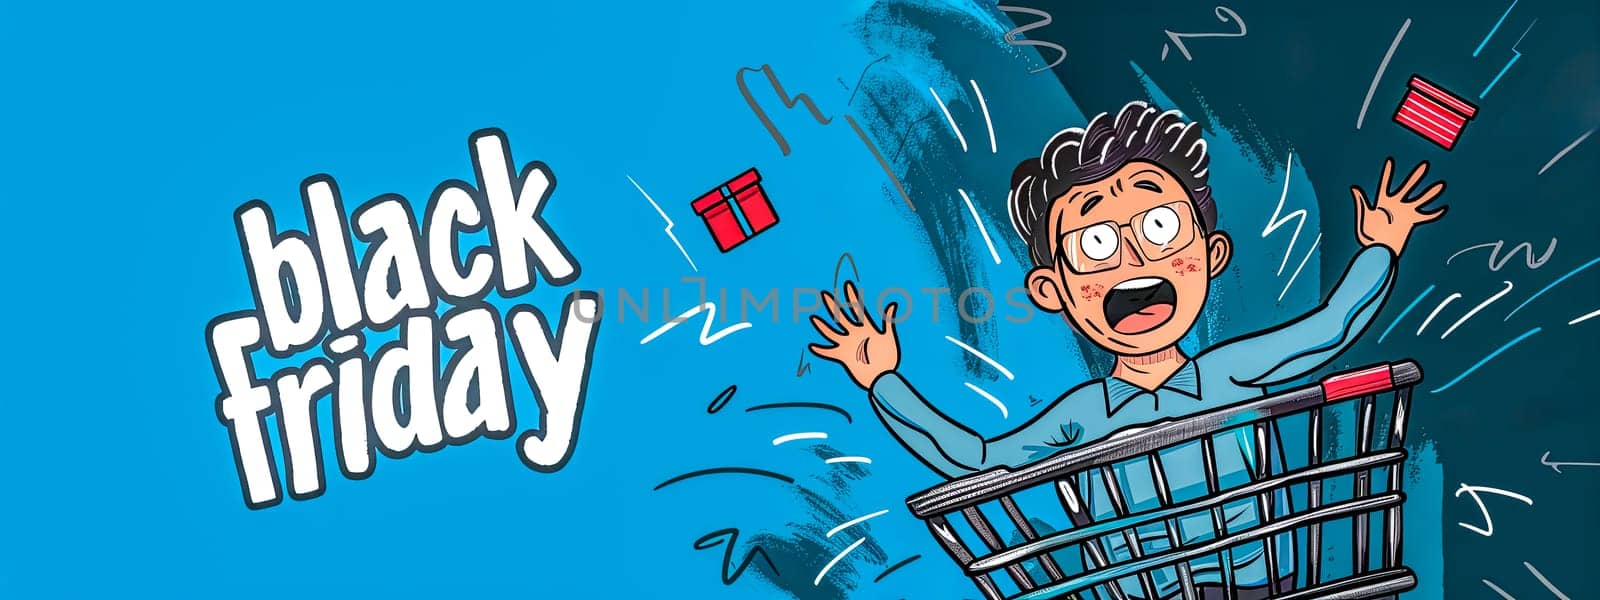 Animated image of a frantic shopper with cart during black friday sale